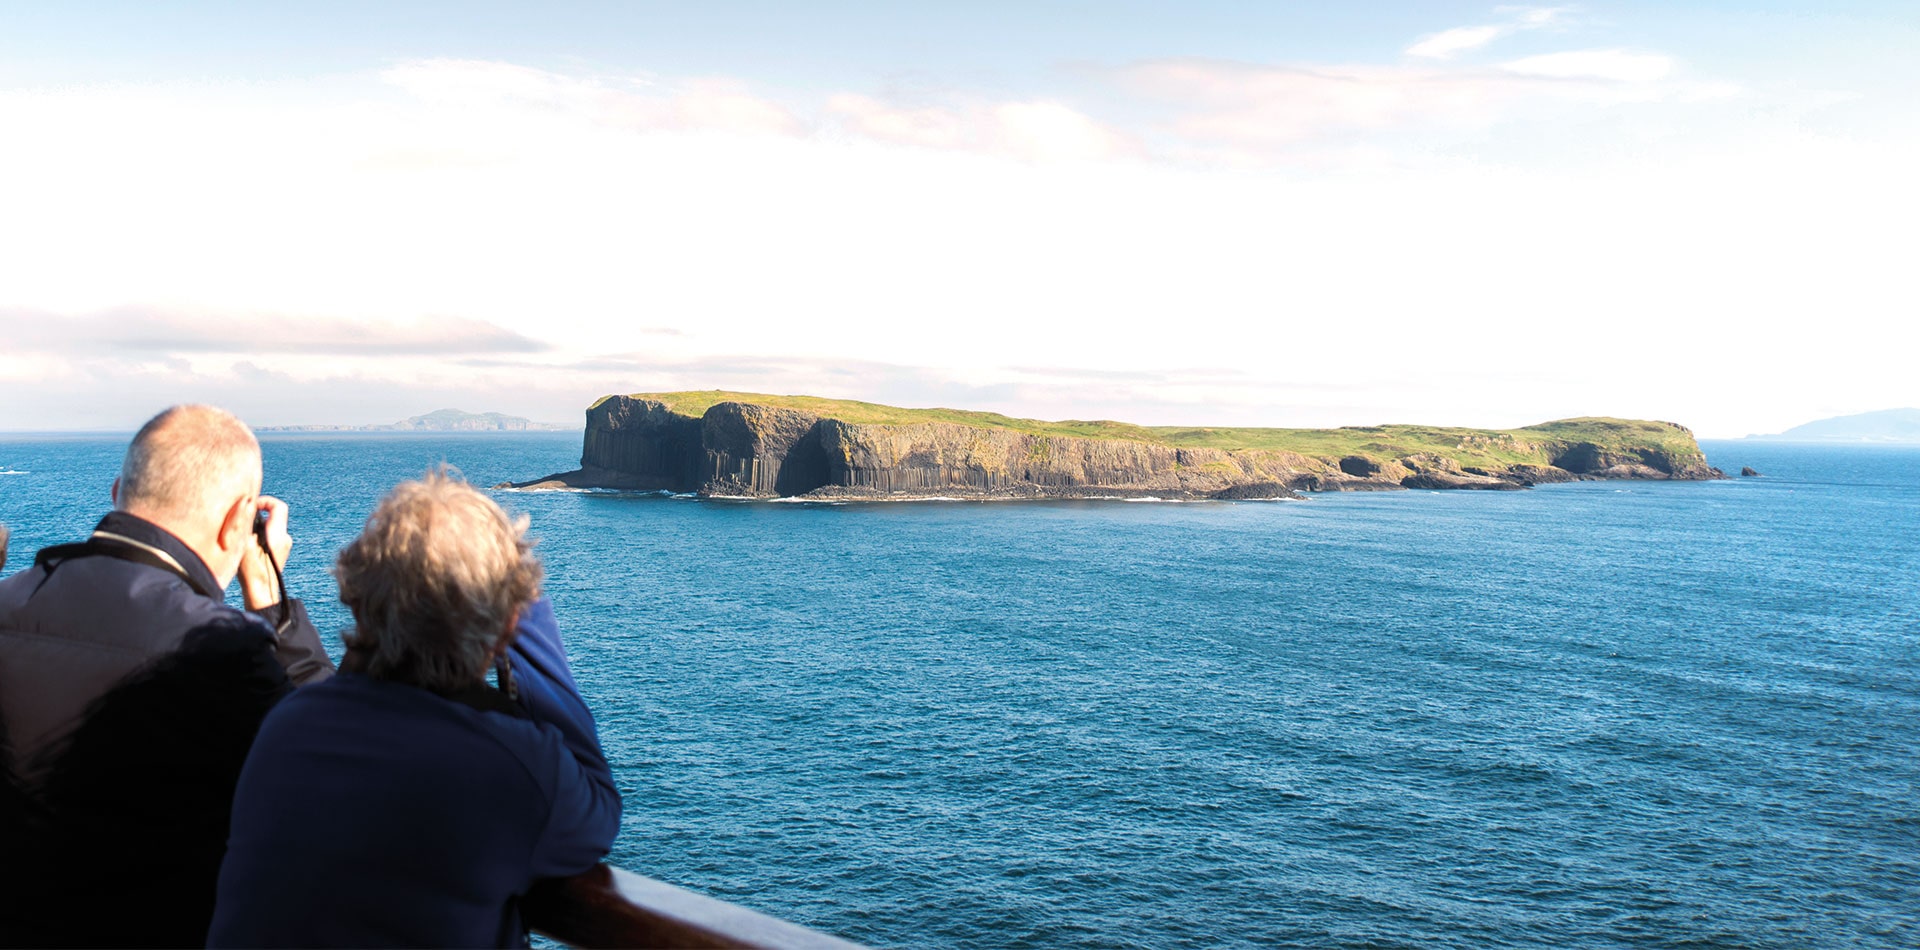 Guests looking out to Fingal's cave, UK from deck